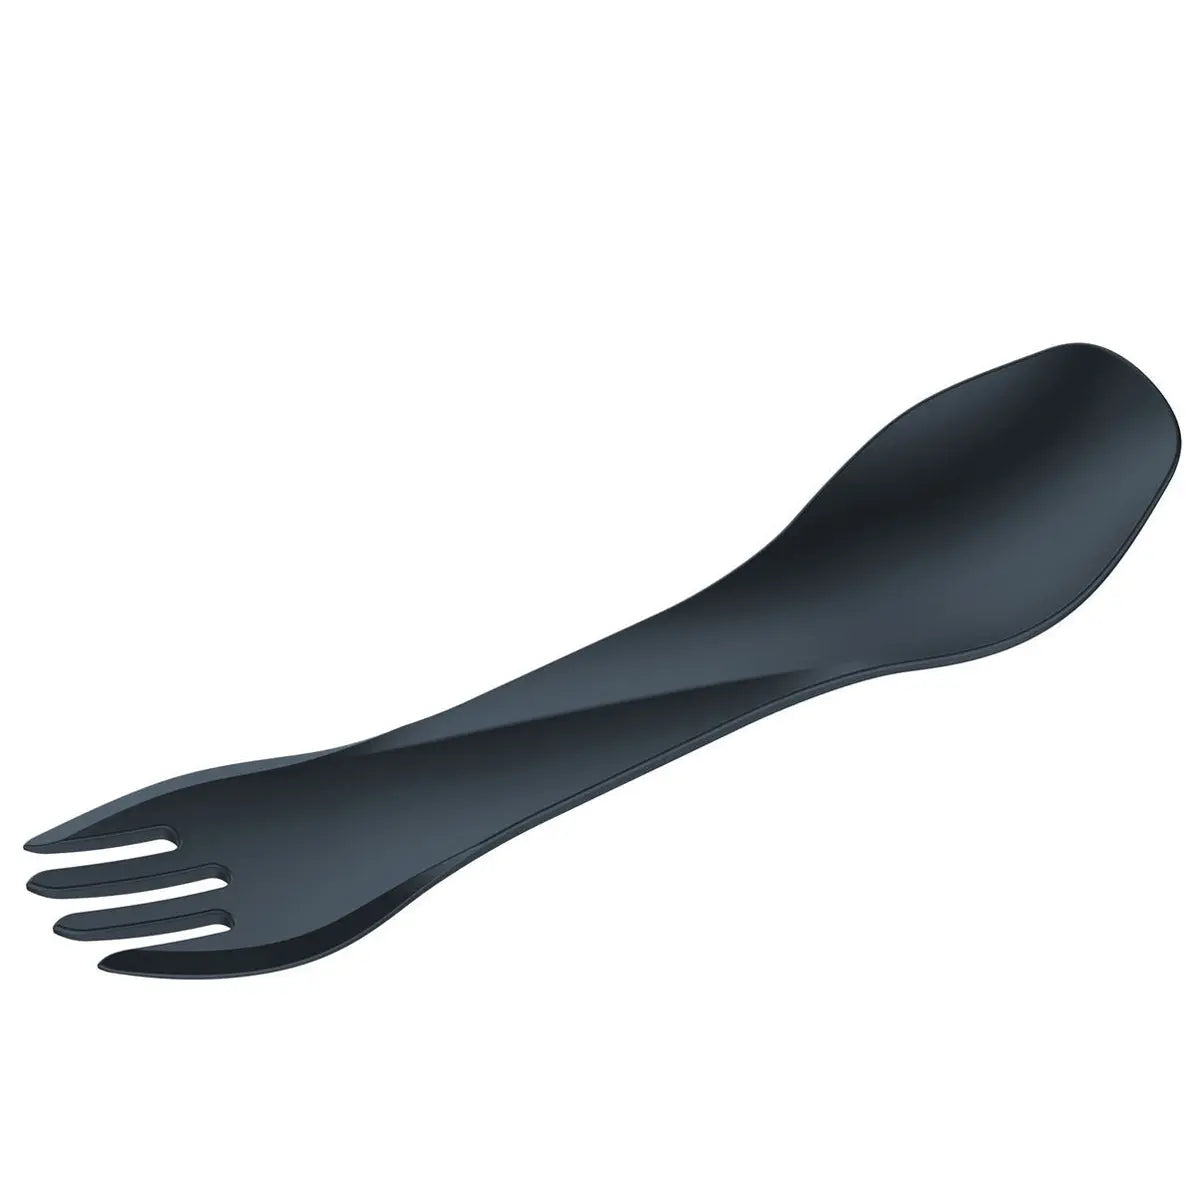 Humangear GoBites Uno Fork and Spoon Combination Travel Utensil Humangear